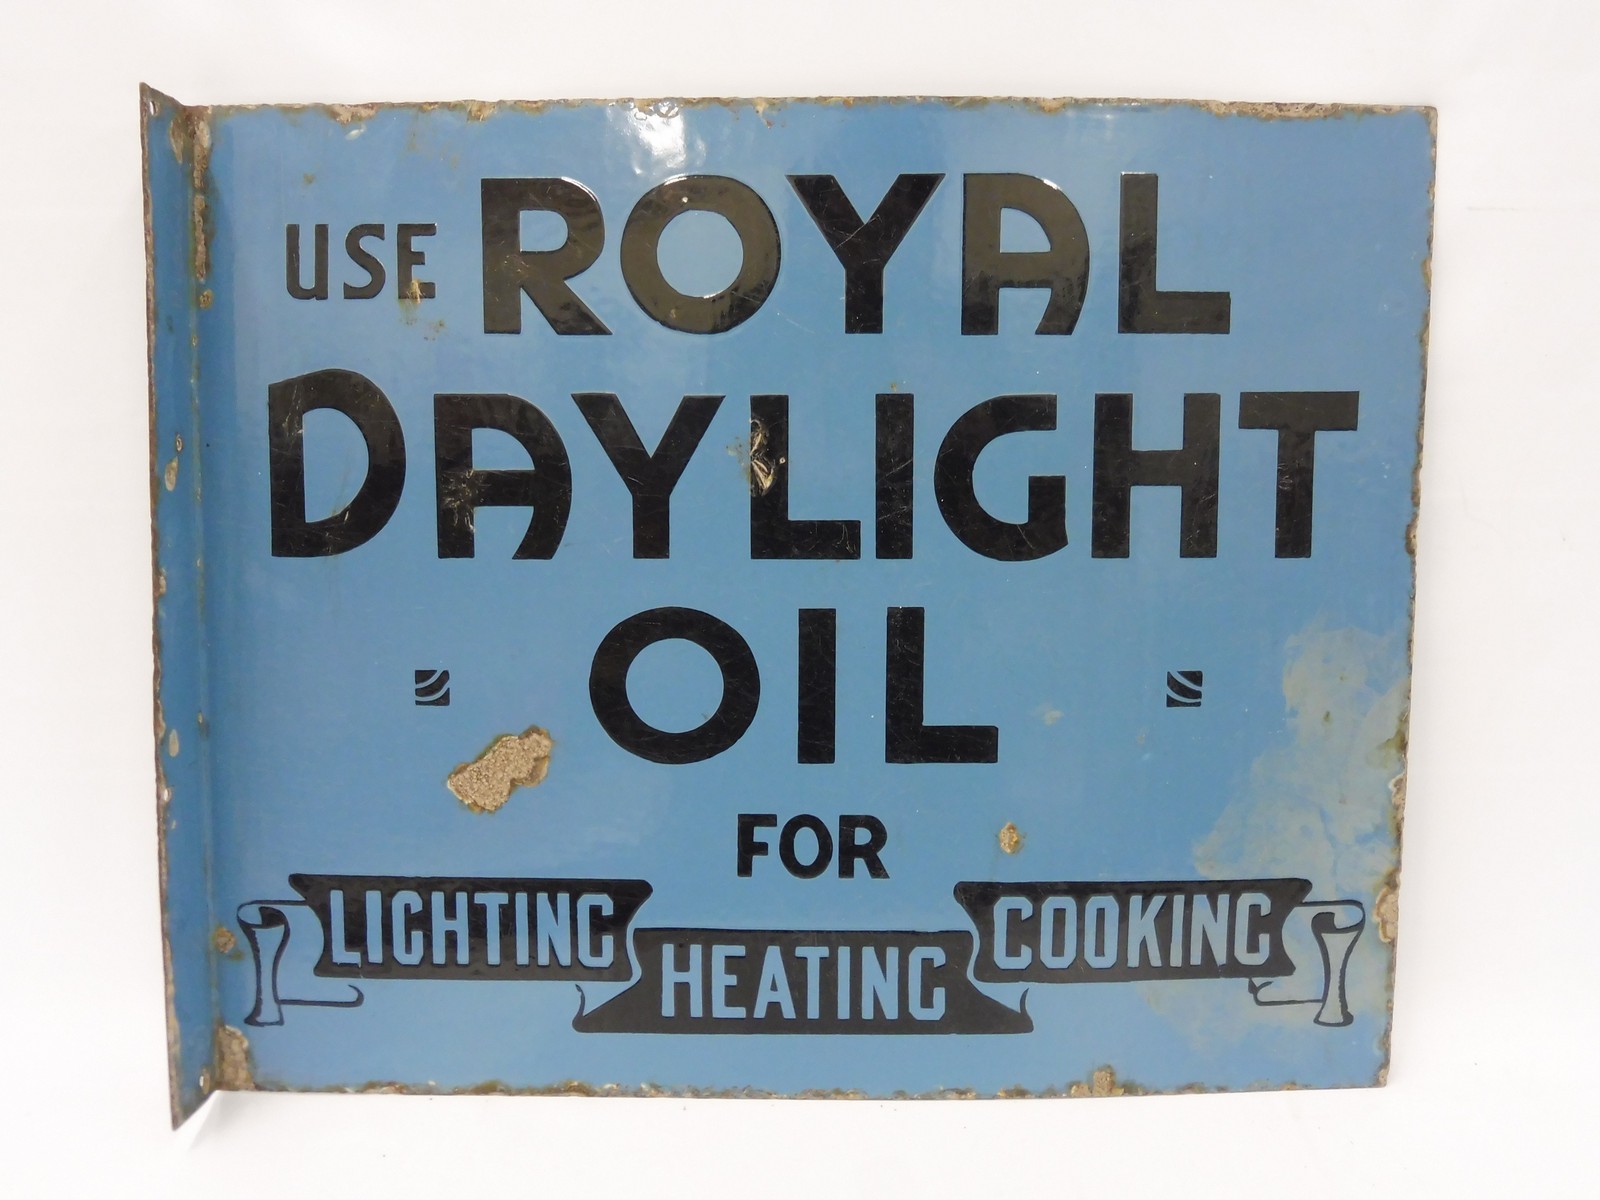 A Royal Daylight Oil for Lighting, Heating and Cooking double sided enamel sign with hanging flange,